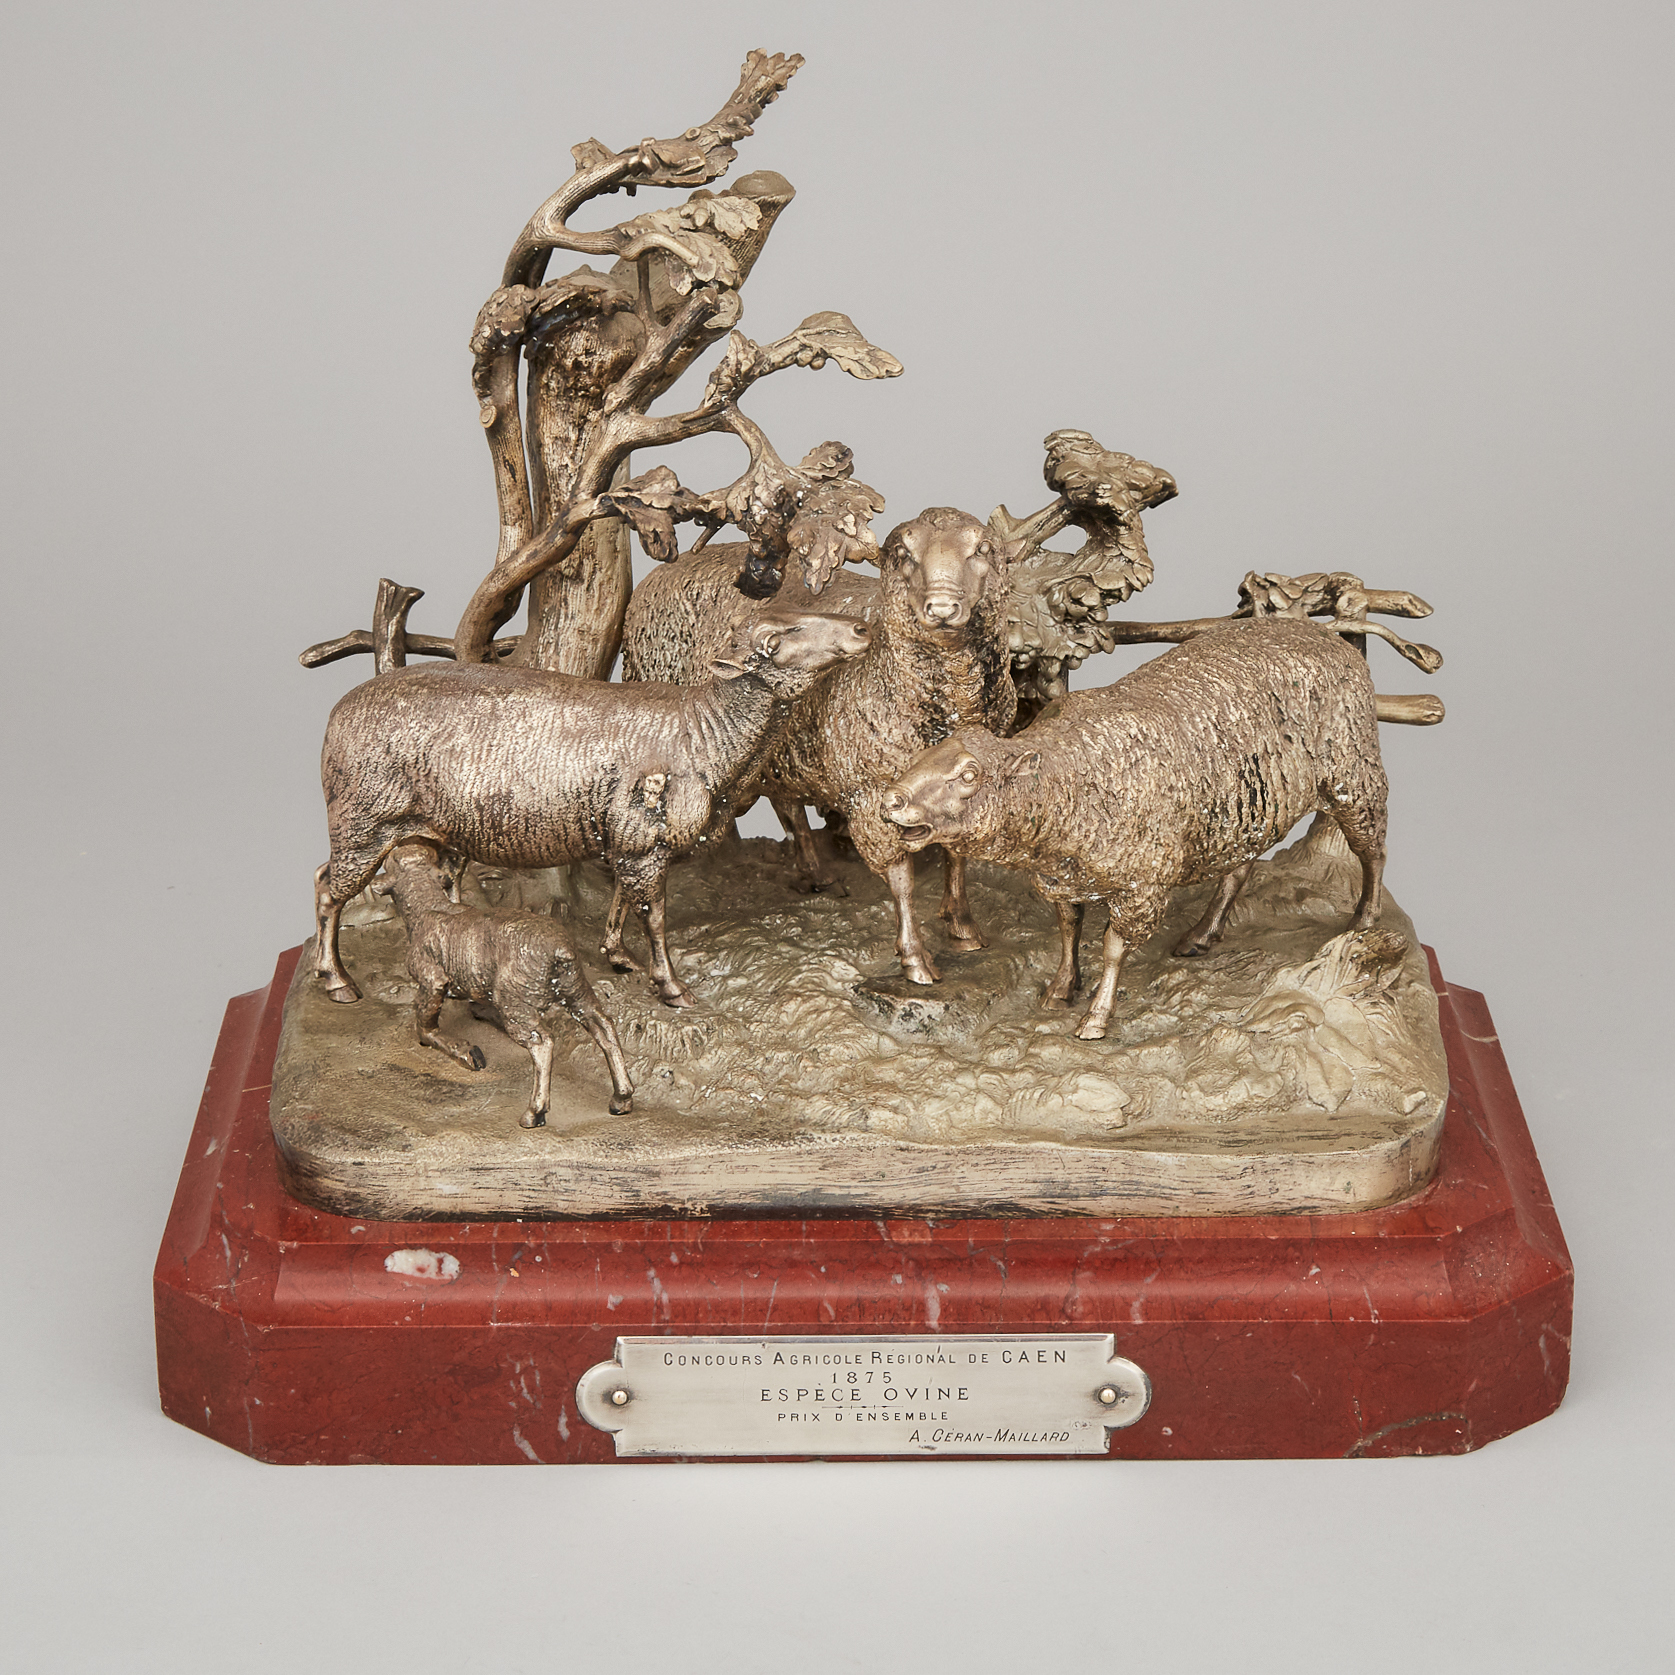 French Silvered Bronze Agricultural Trophy by Emile Froment Meurice (1837-1913), Paris, 1875